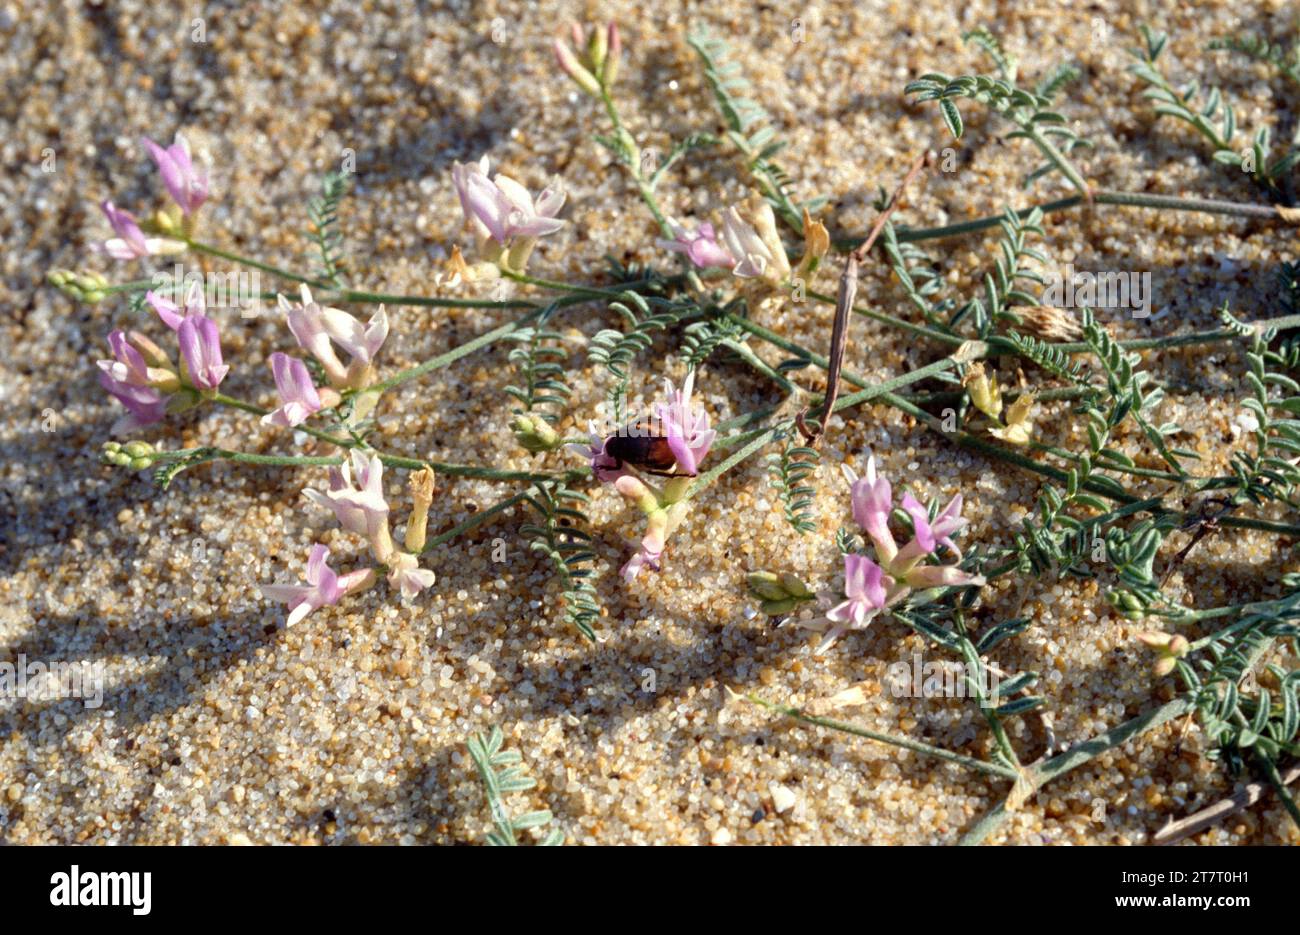 Astragale de Bayonne (Astragalus baionensis) is a perennial herb endemic to Atlantic coasts to France. This photo was taken in Landes, France. Stock Photo